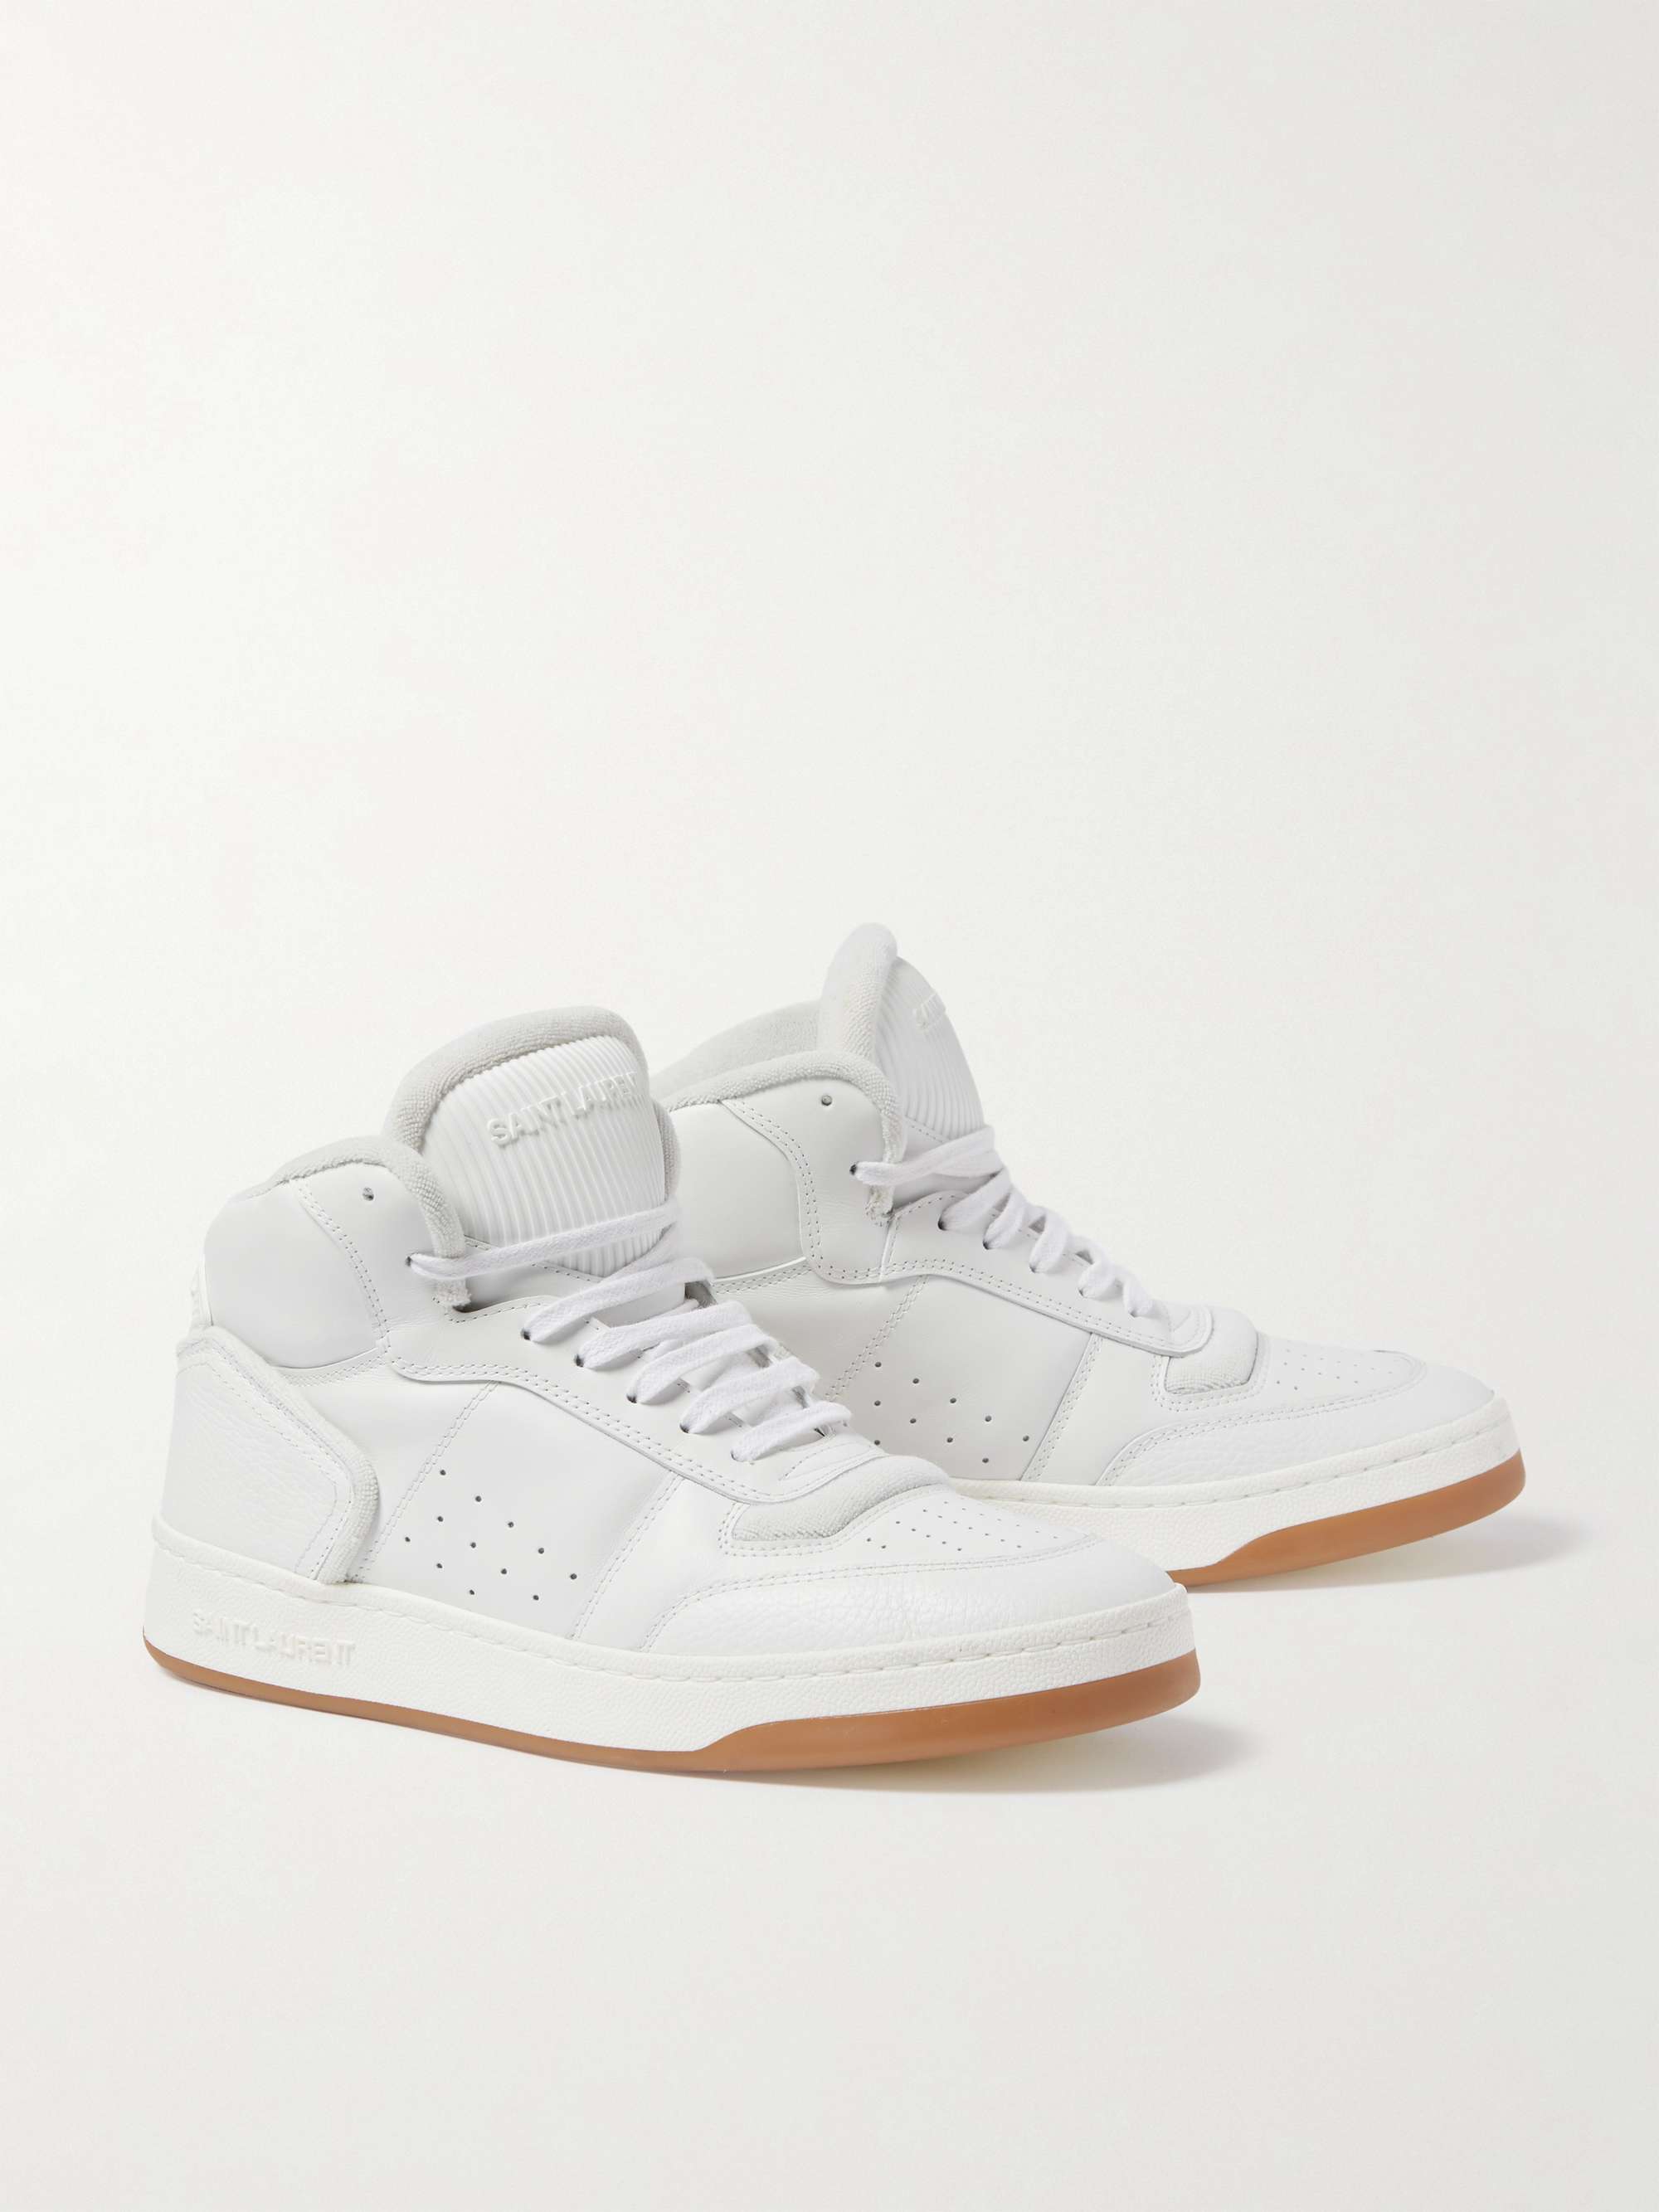 SAINT LAURENT SL/80 Perforated Leather Sneakers